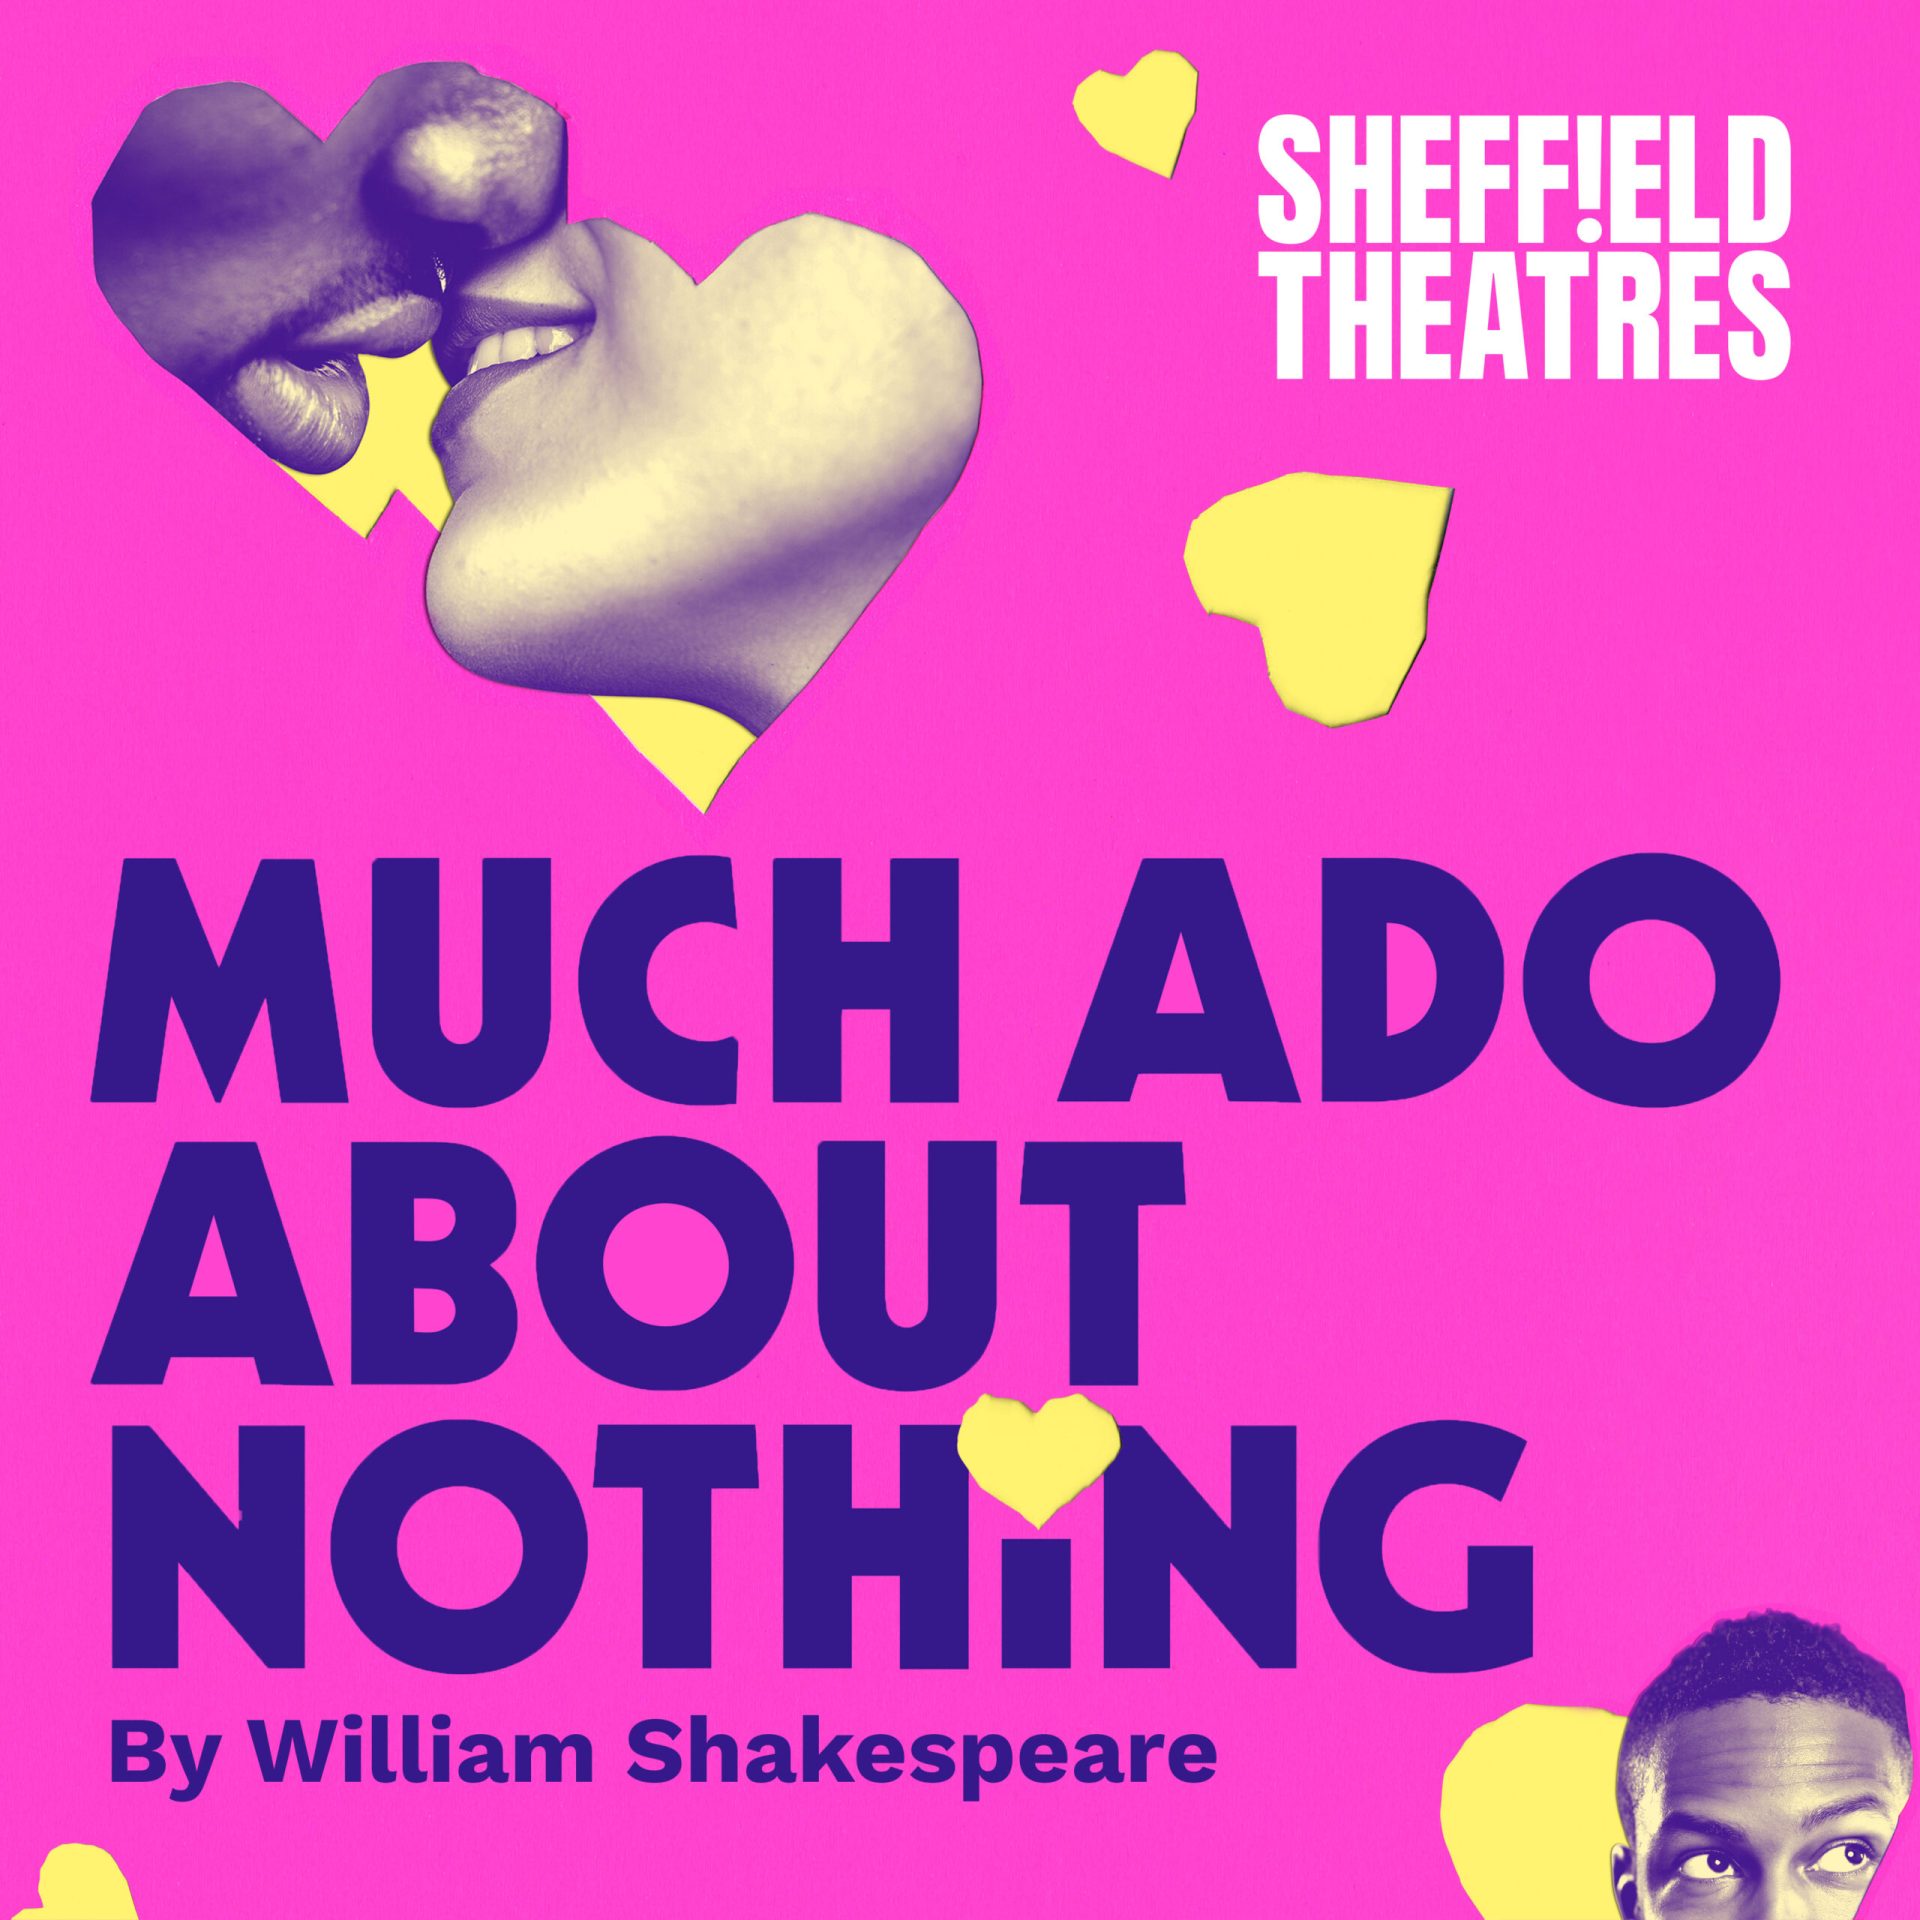 'Much Ado About Nothing, by William Shakespeare.' This is a co-production between Sheffield Theatres and Ramps on the Moon. The background is pink, and yellow hearts dot around it, showing fragments of photographs of people kissing, pointing or eavesdropping.